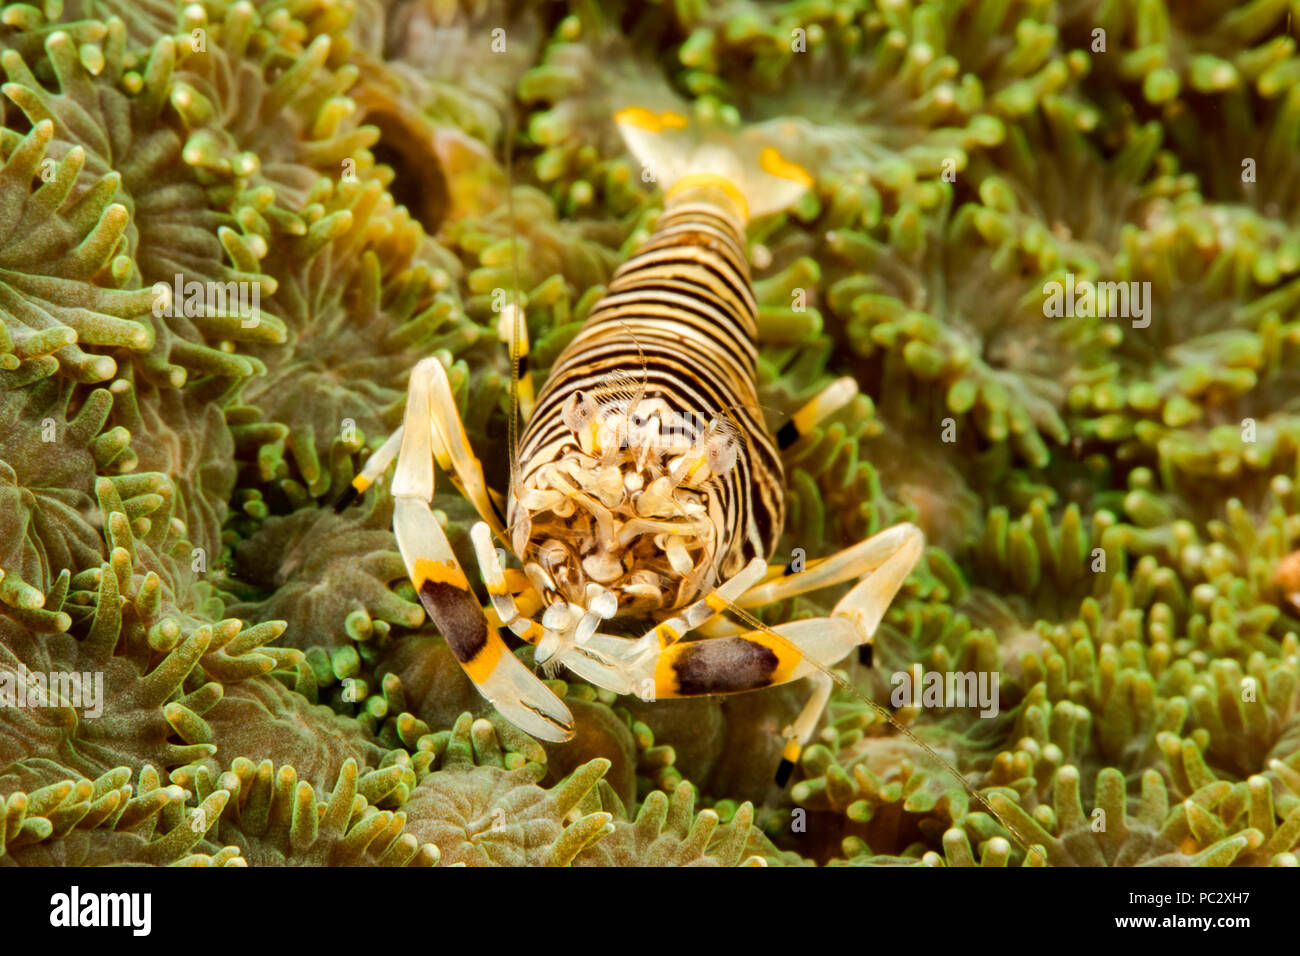 The bumblebee shrimp, Gnathophyllum americanum, is similar in coloration to a brightly colored bumblebee, and can grow up to 1 inch in length, Philipp Stock Photo